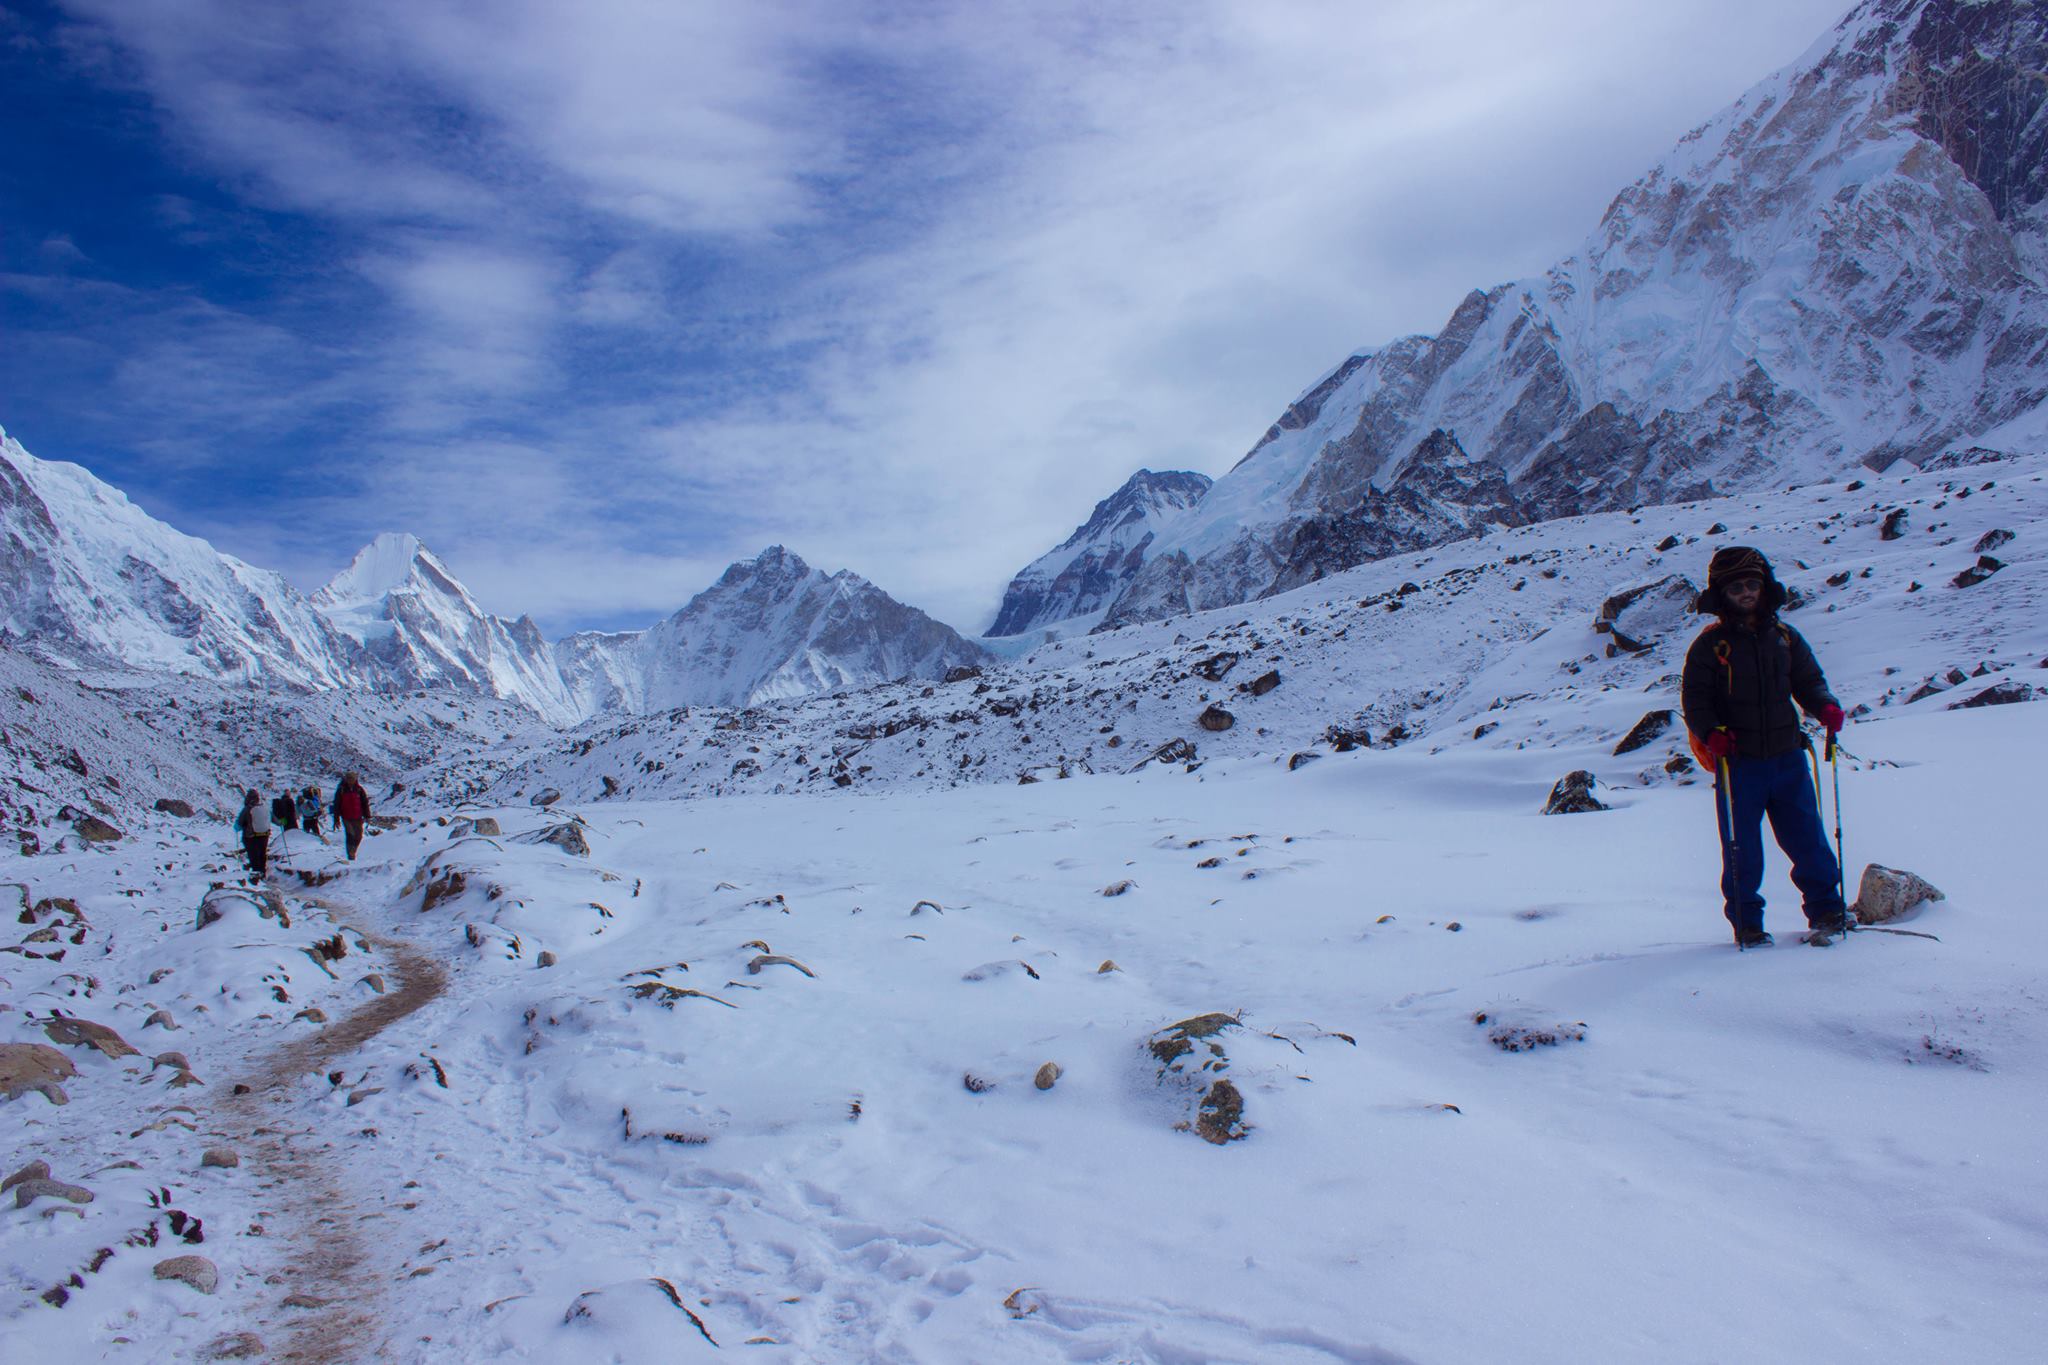 Hiking from Dingboche to Lobuche